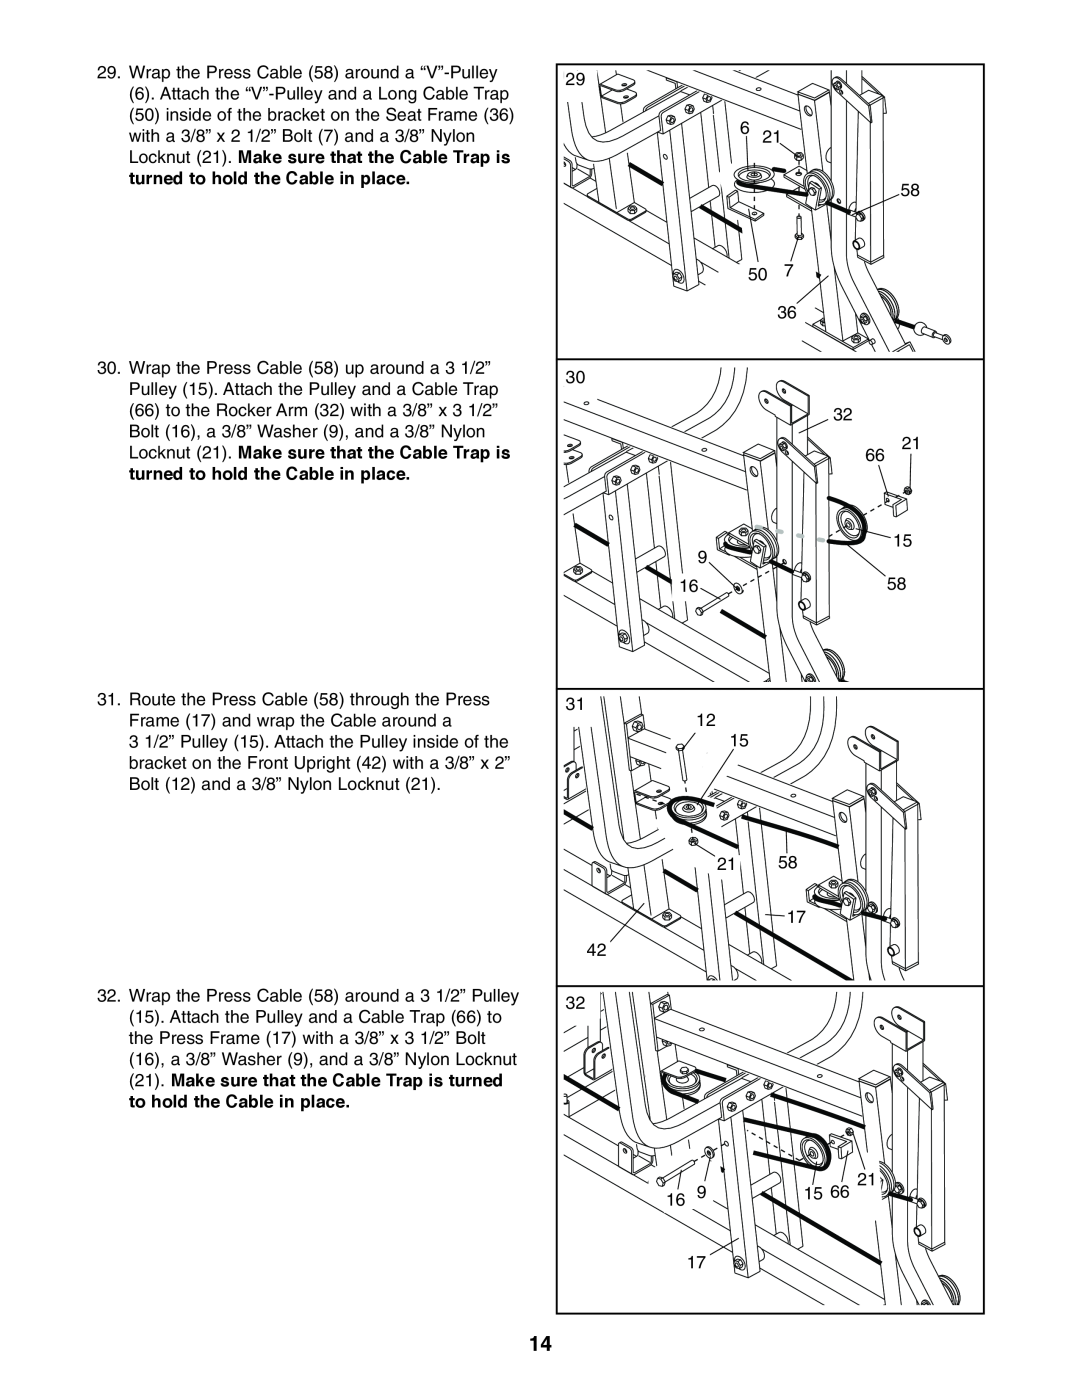 Weider WESY19610 user manual Locknut 21. Make sure that the Cable Trap is, turned to hold the Cable in place 